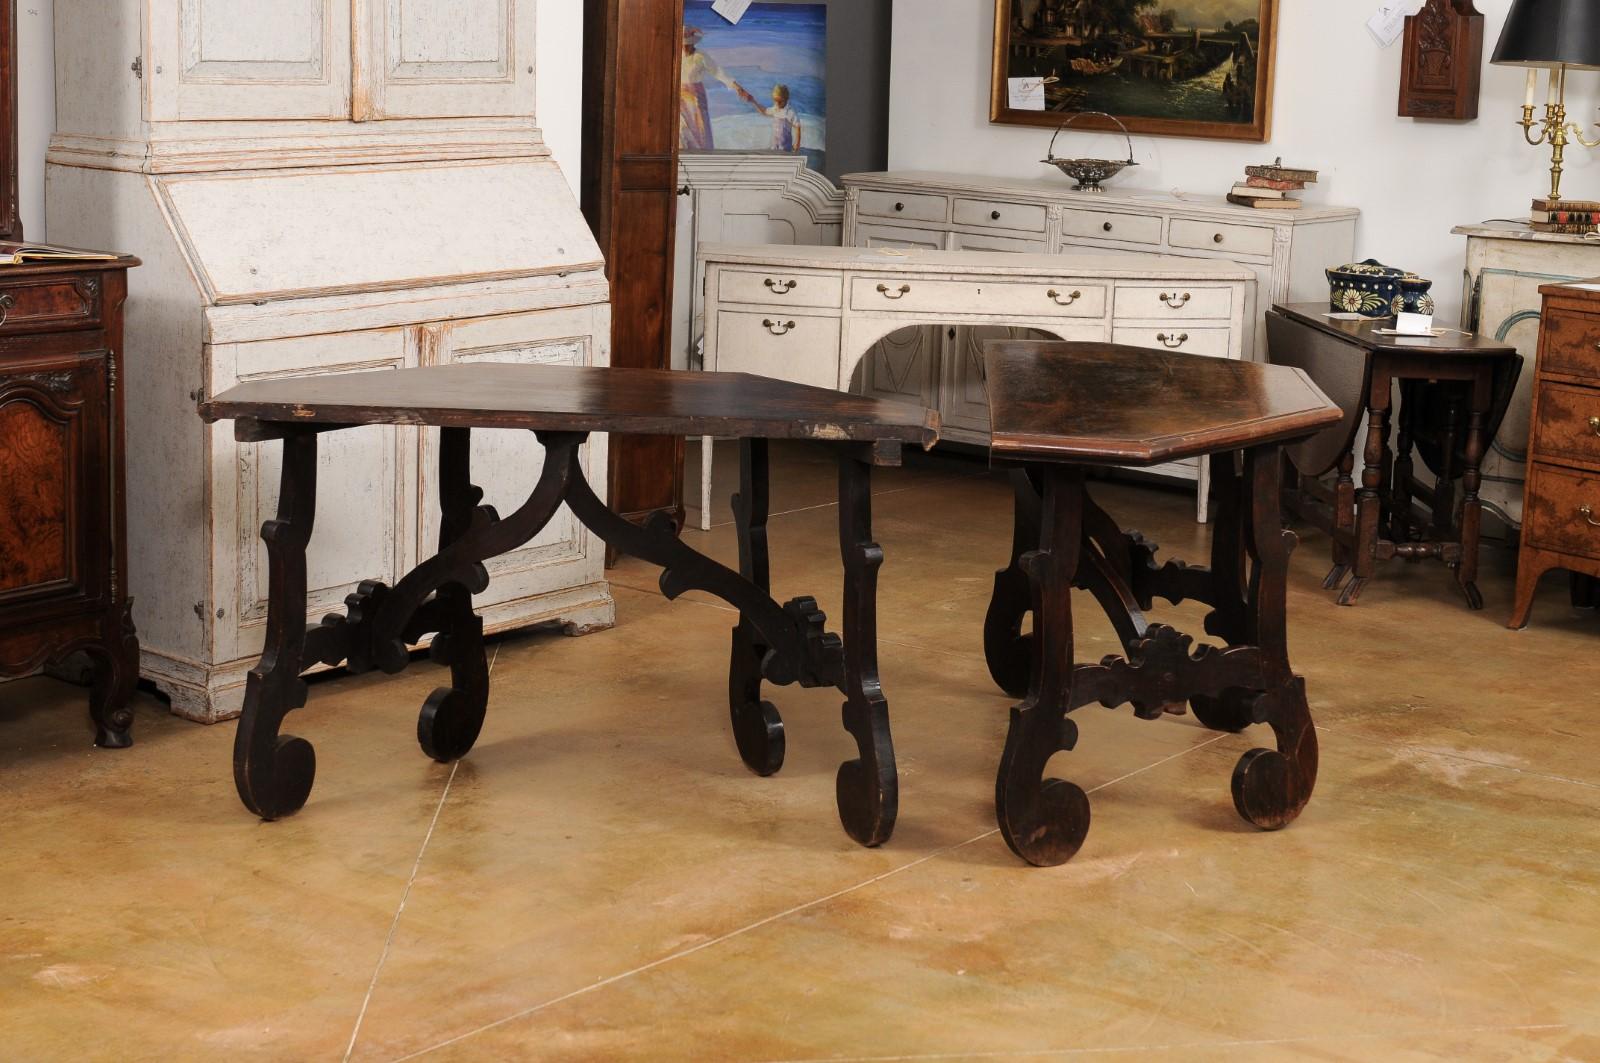 17th Century Italian Baroque Walnut Fratino Consoles with Carved Bases, a Pair For Sale 4